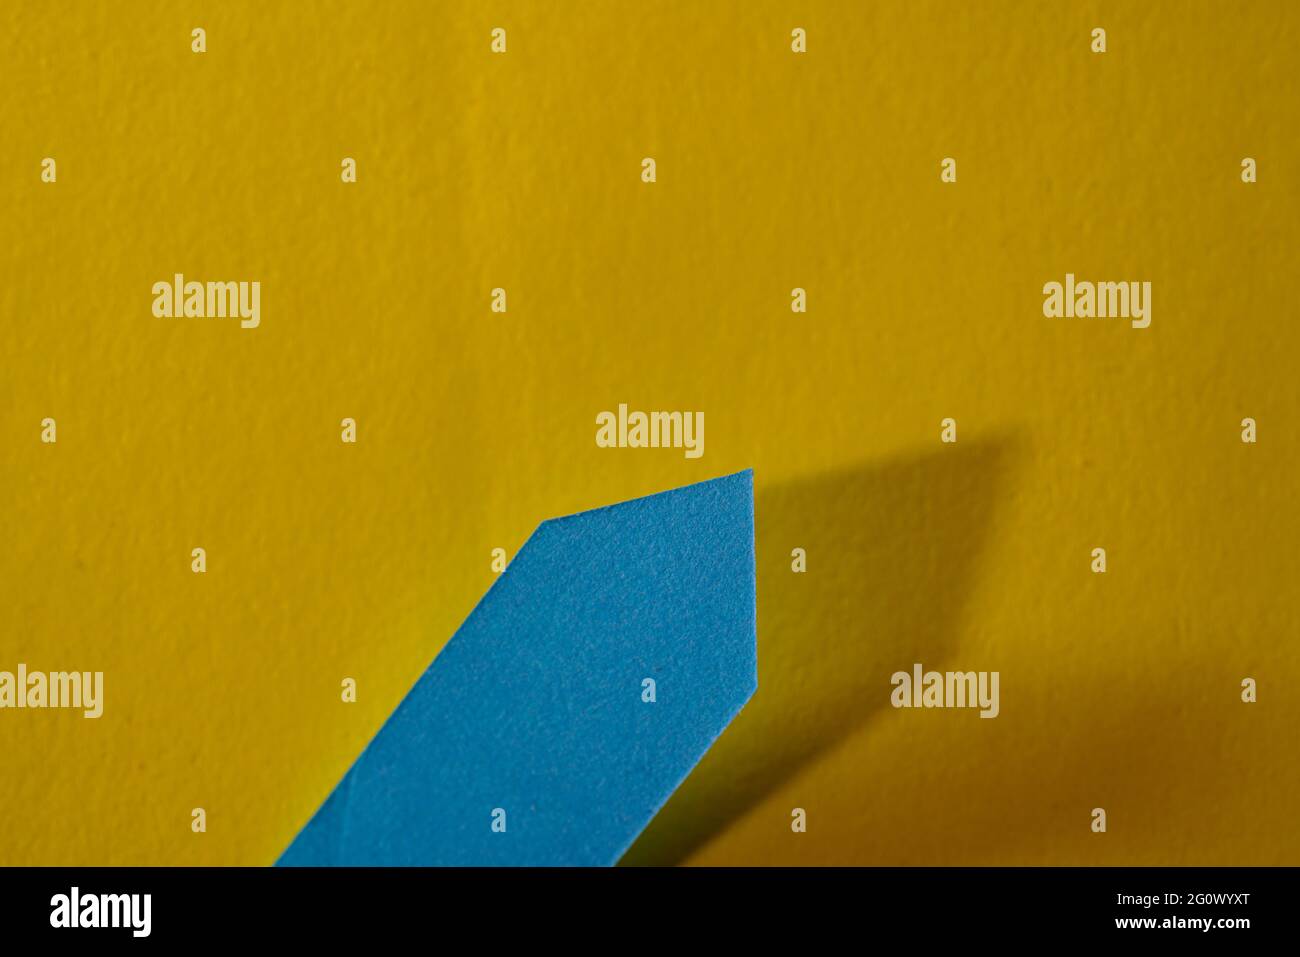 Closeup shot of a blue self-adhesive note on a yellow background Stock Photo